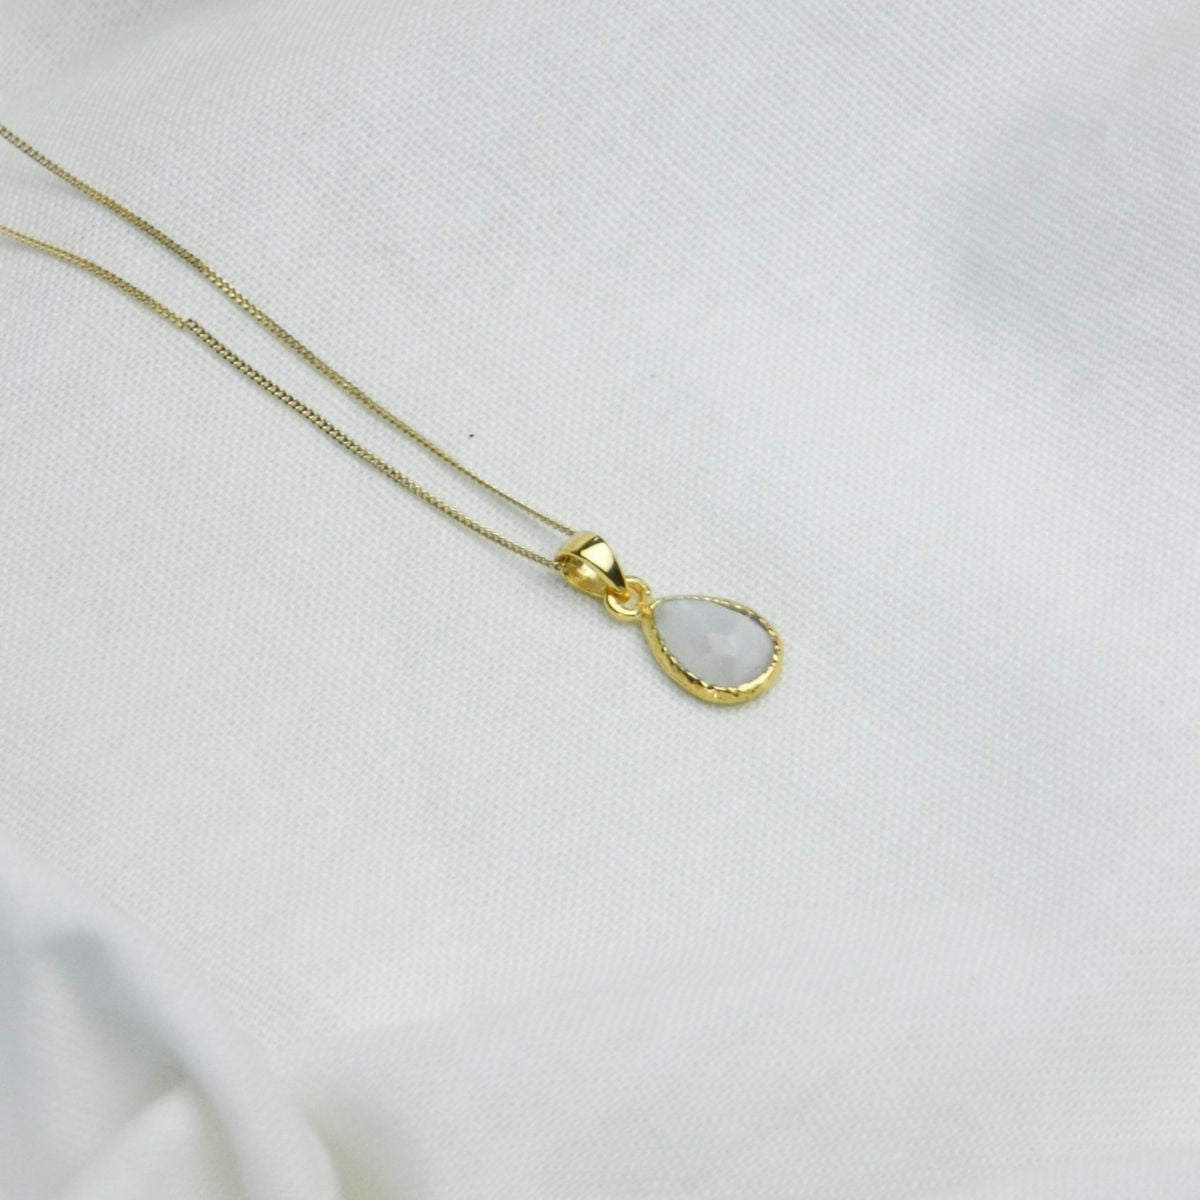 a white pendant necklace on a white cloth